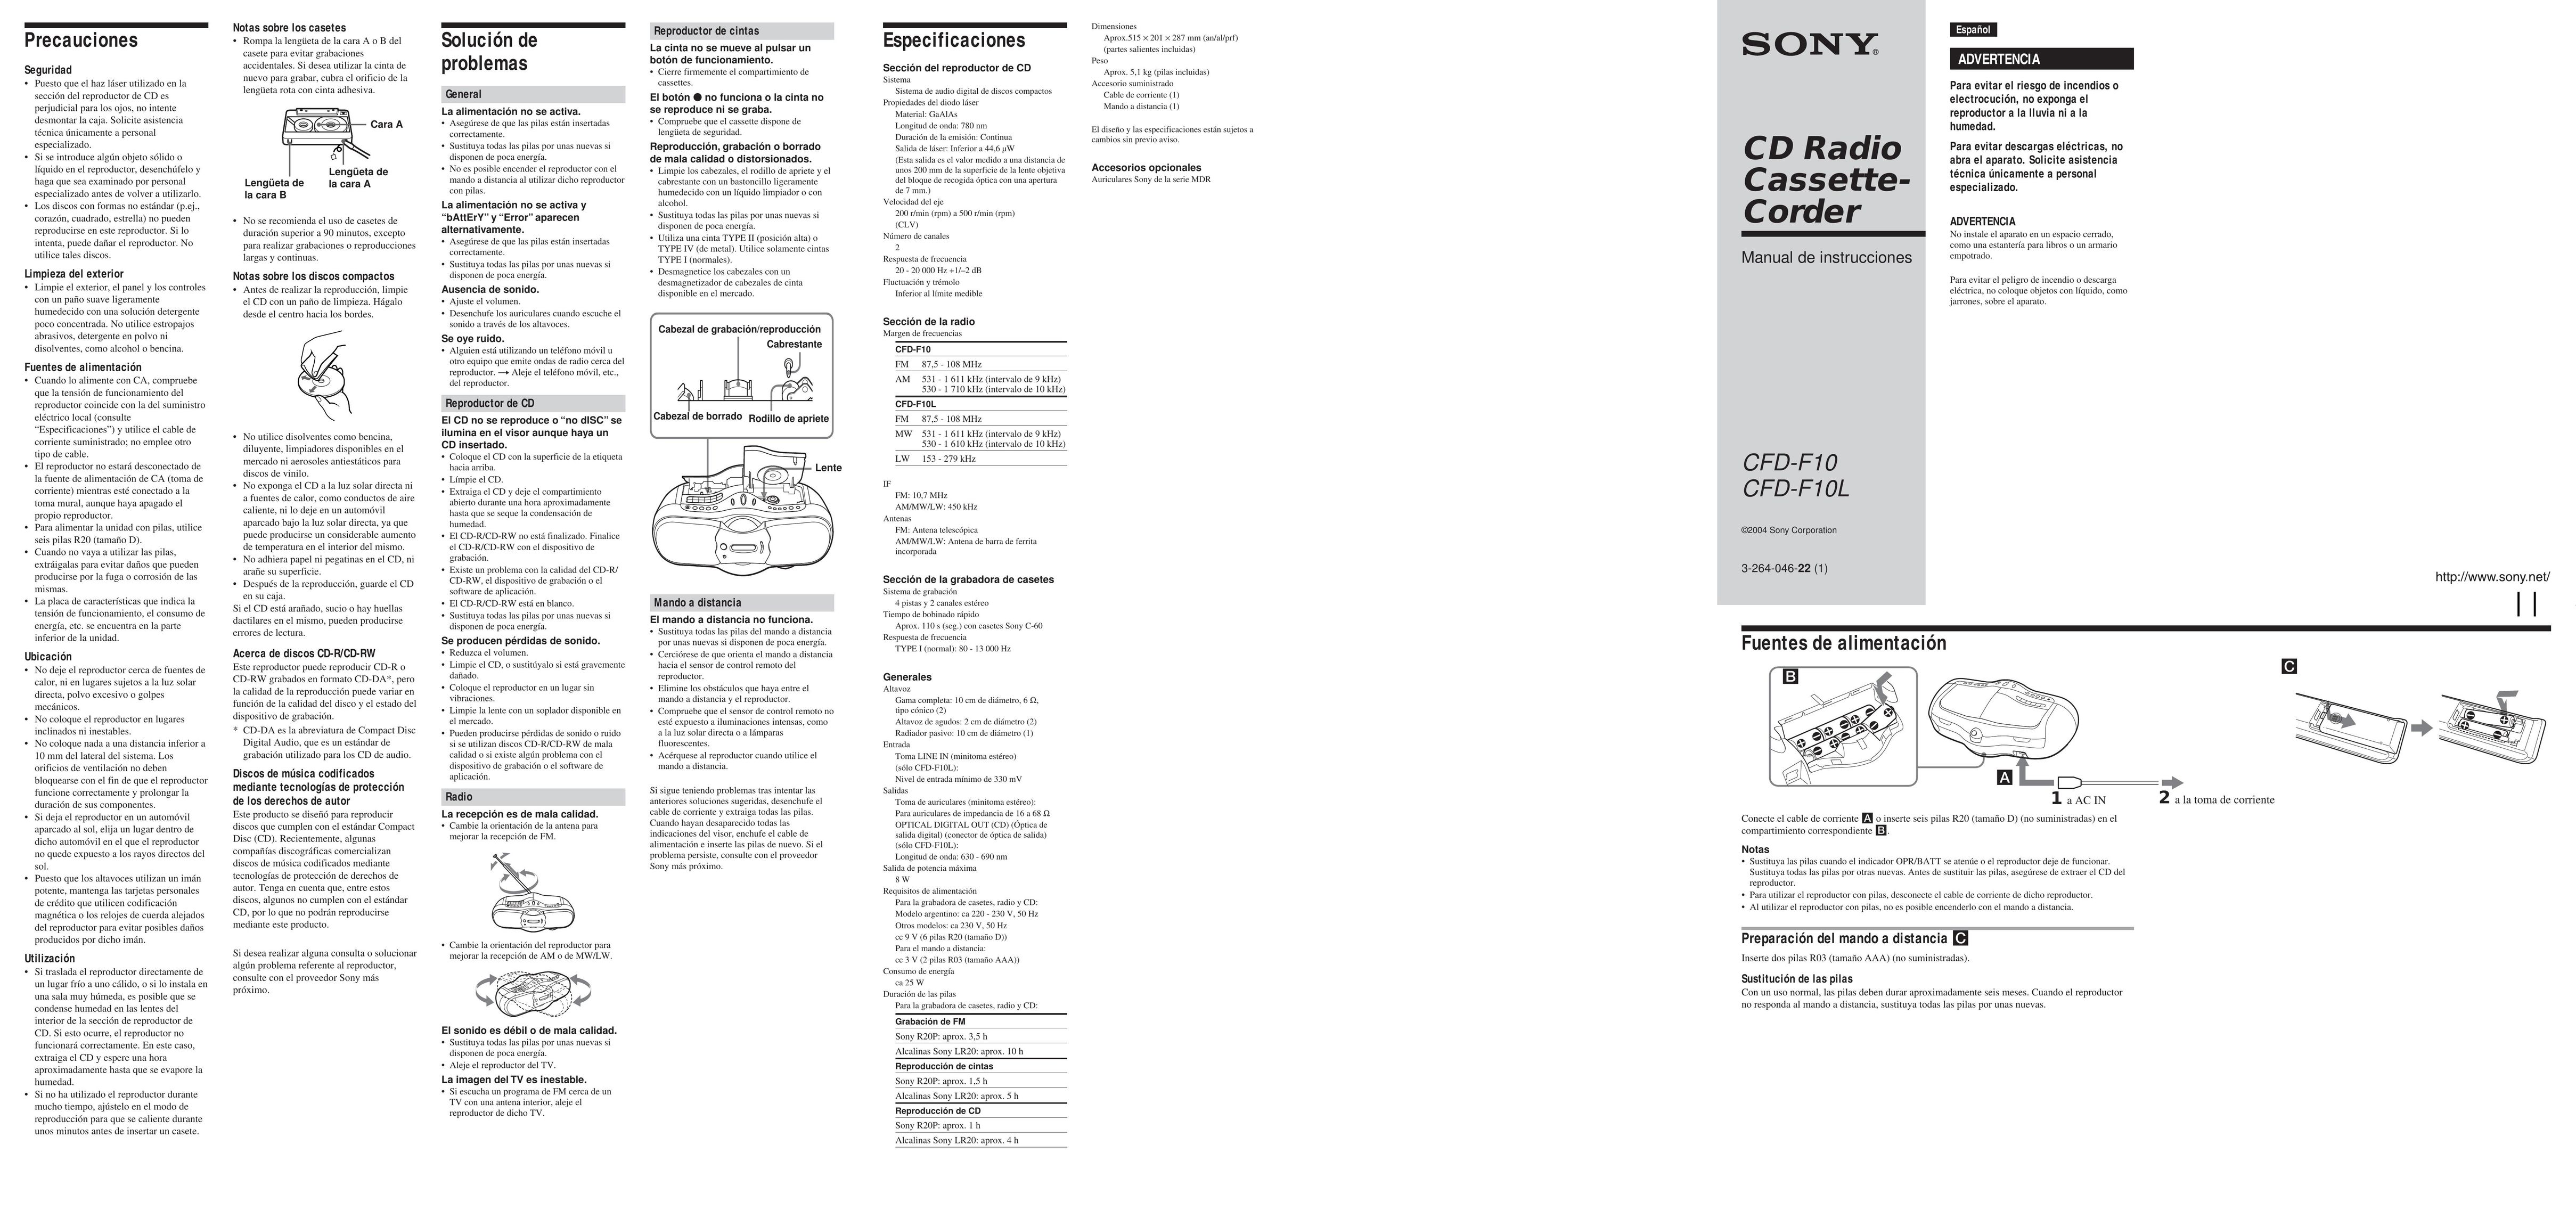 Sony CFD-F10L Cassette Player User Manual